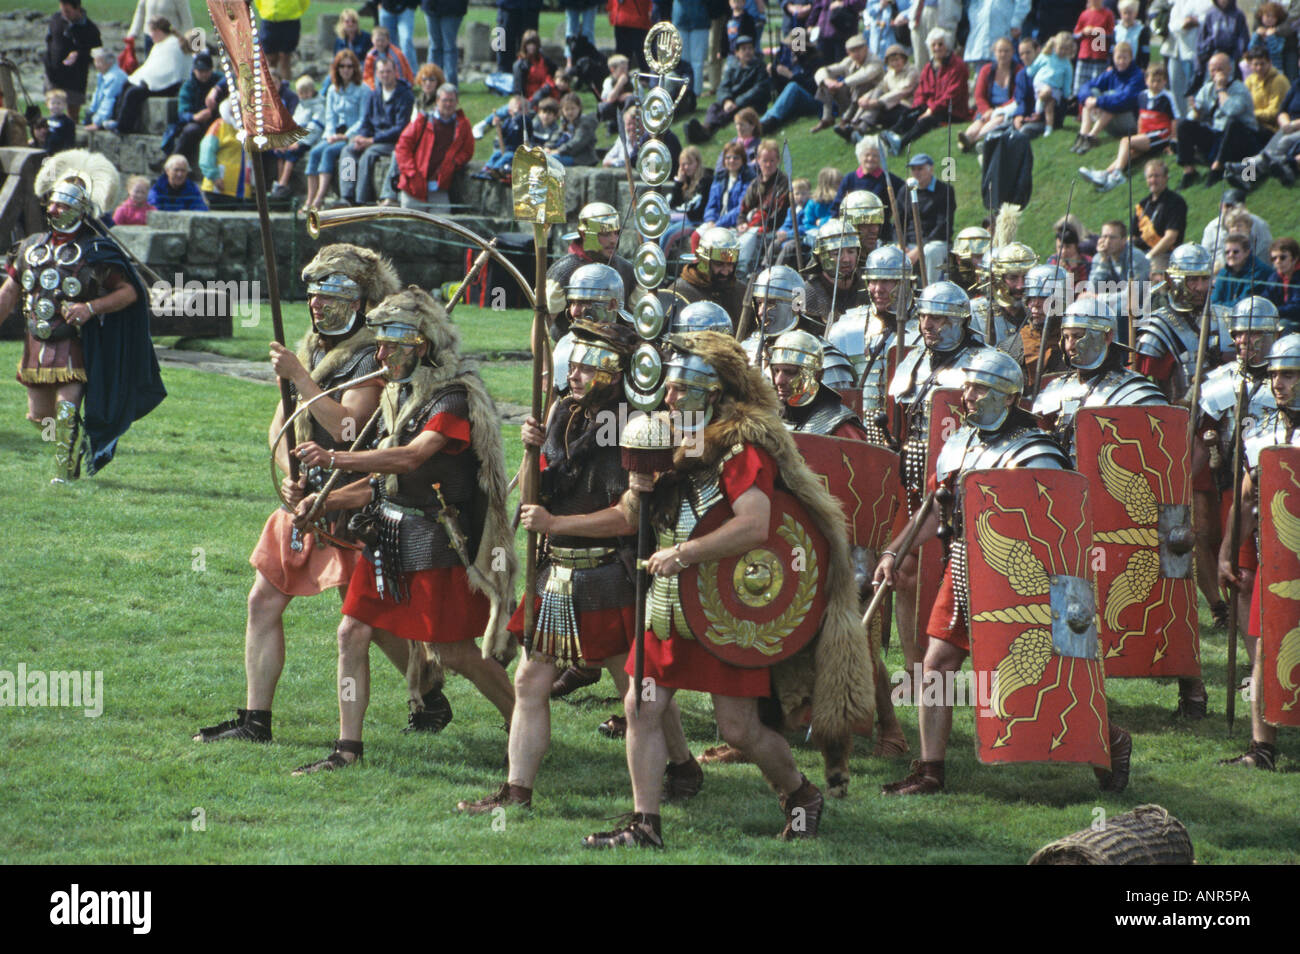 Men dressed as Roman Soldiers at a public display in Corbridge Northumberland England Stock Photo